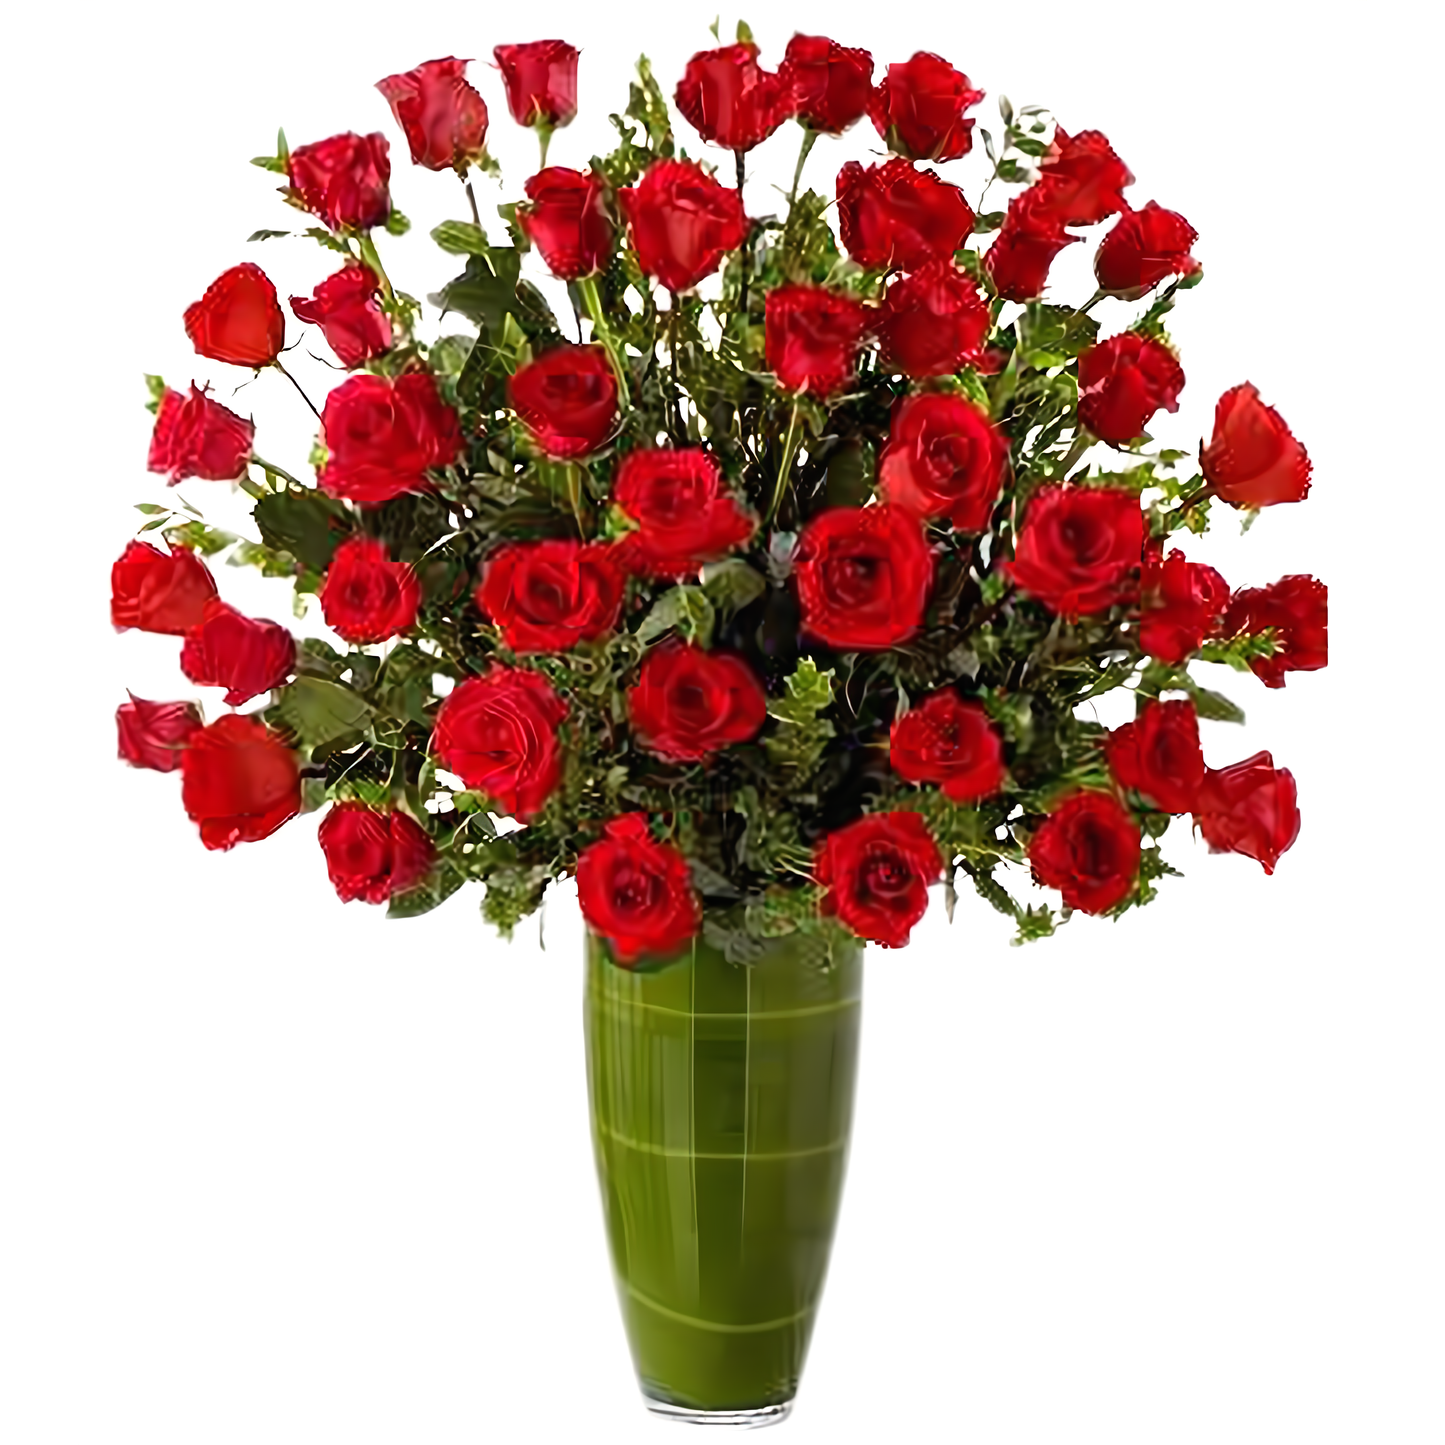 NYC Flower Delivery - Luxury Rose Bouquet - 24 Premium Red Long Stem Roses - Products > Luxury Collection